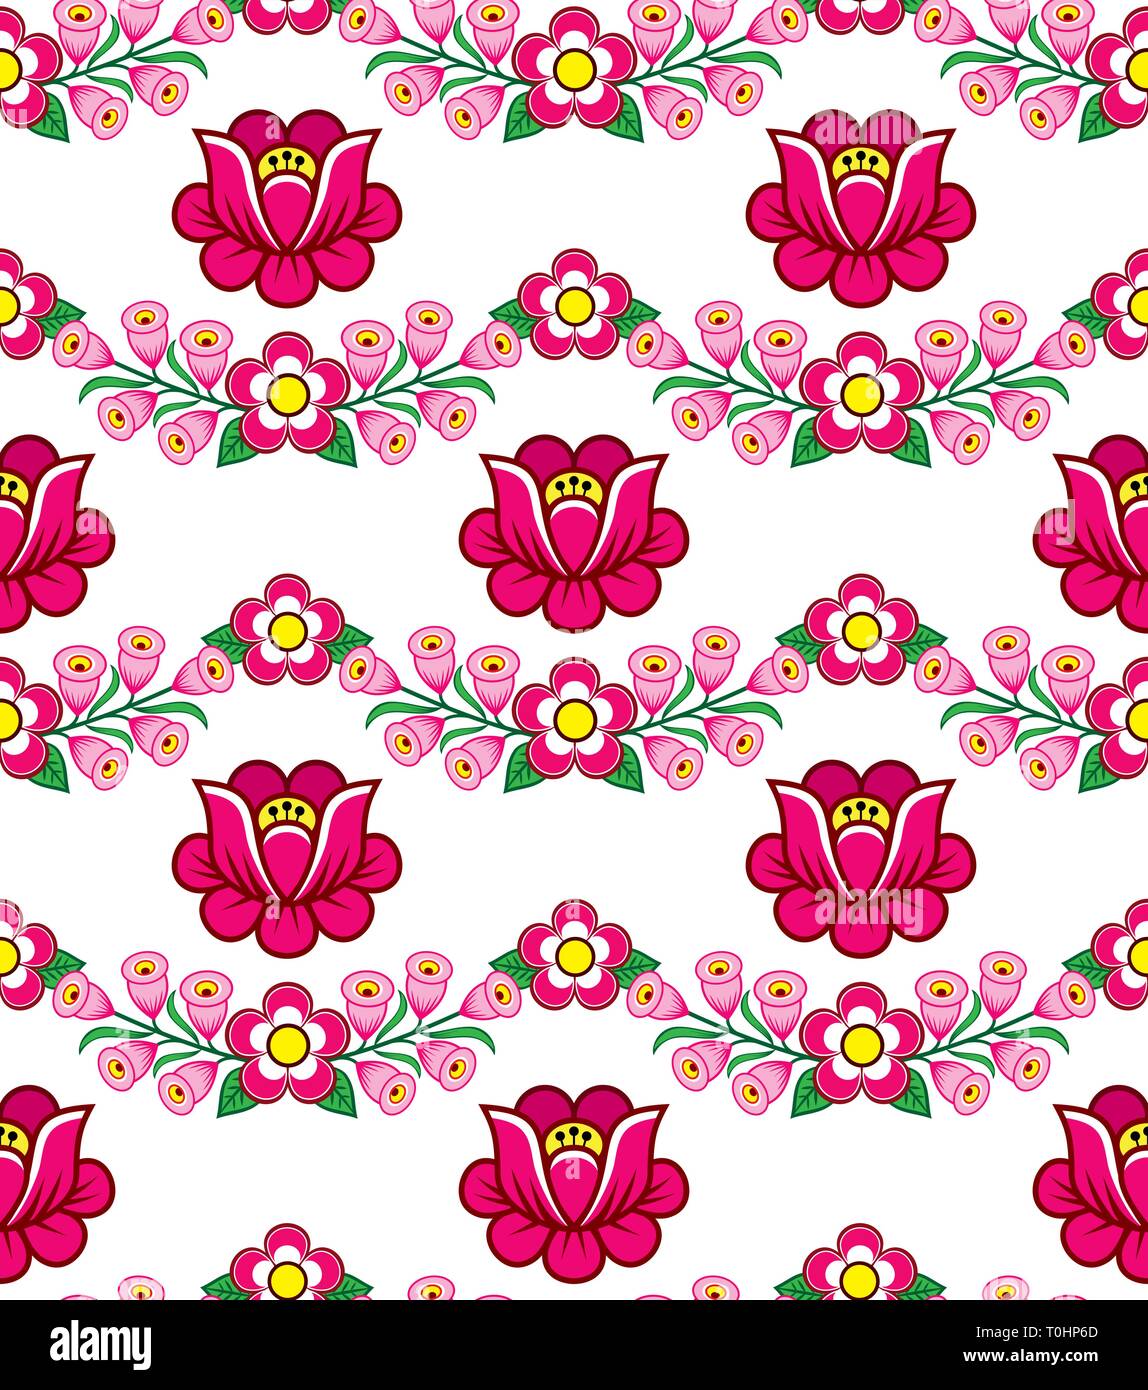 Folk art seamless floral vector pattern, Polish cute traditional ornaments, folk designs with flowers from Zalipie, Poland - textile, wallpaper design Stock Vector